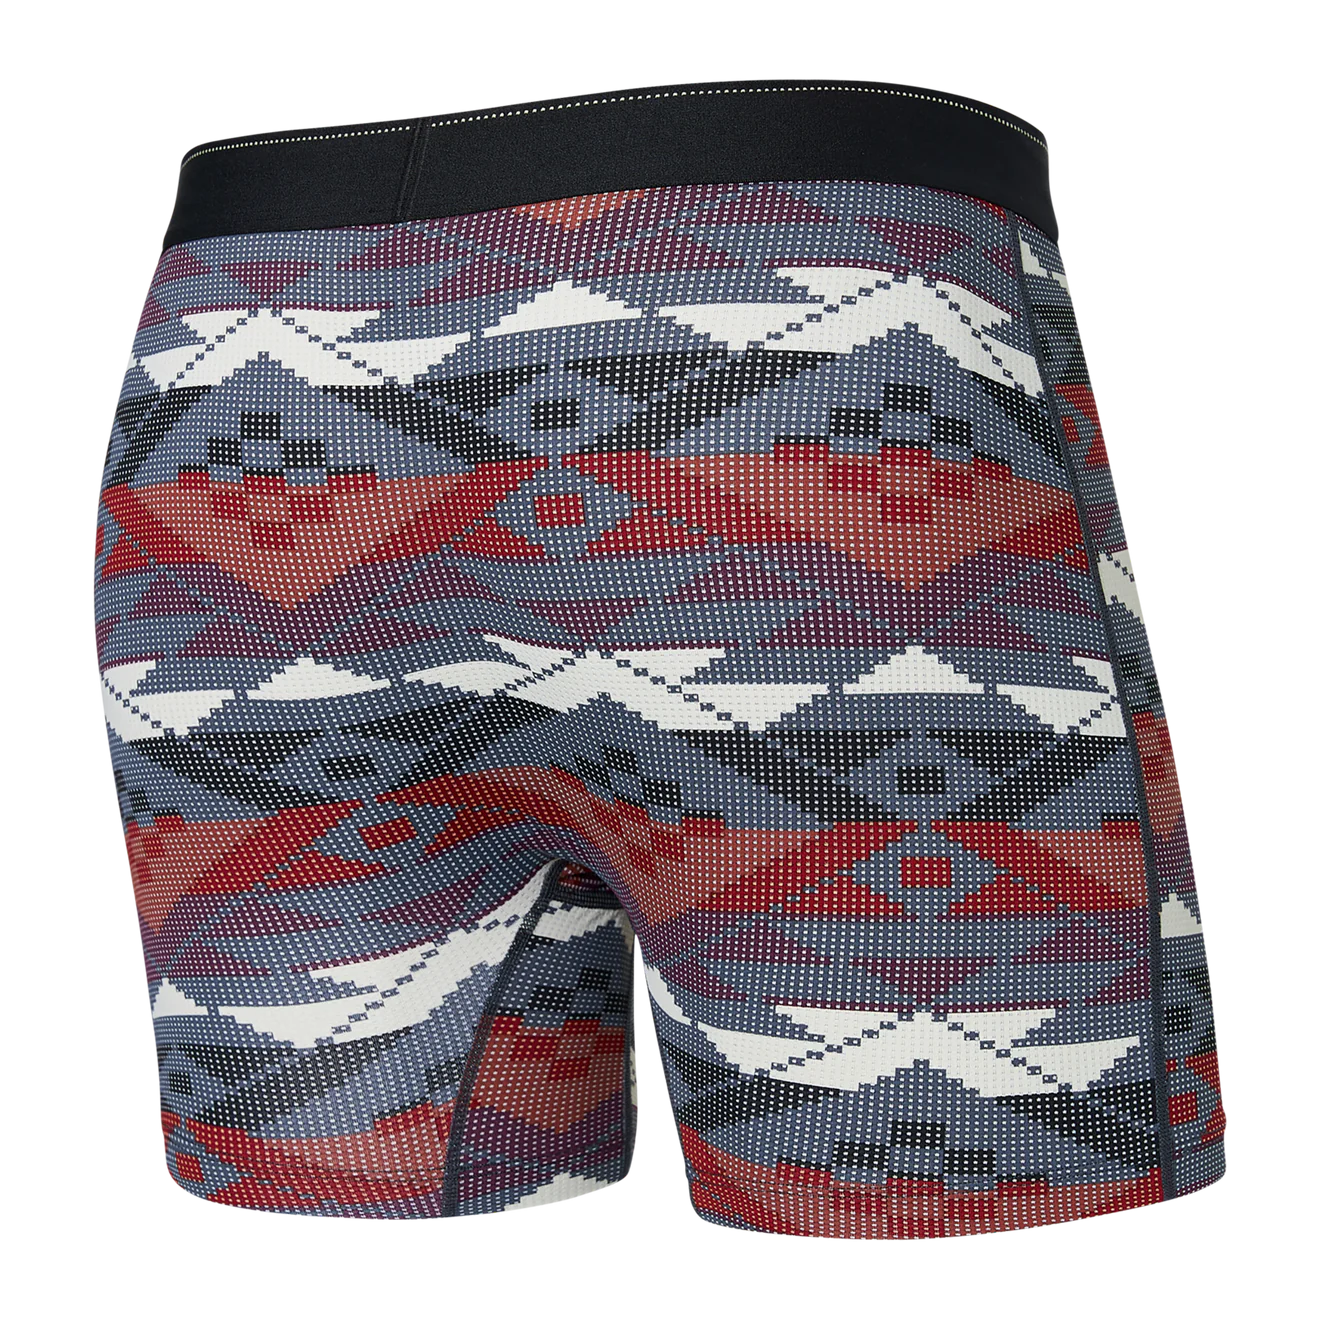 SAXX M Quest Quick Dry Mesh Boxer Brief Fly GEO / NAVY